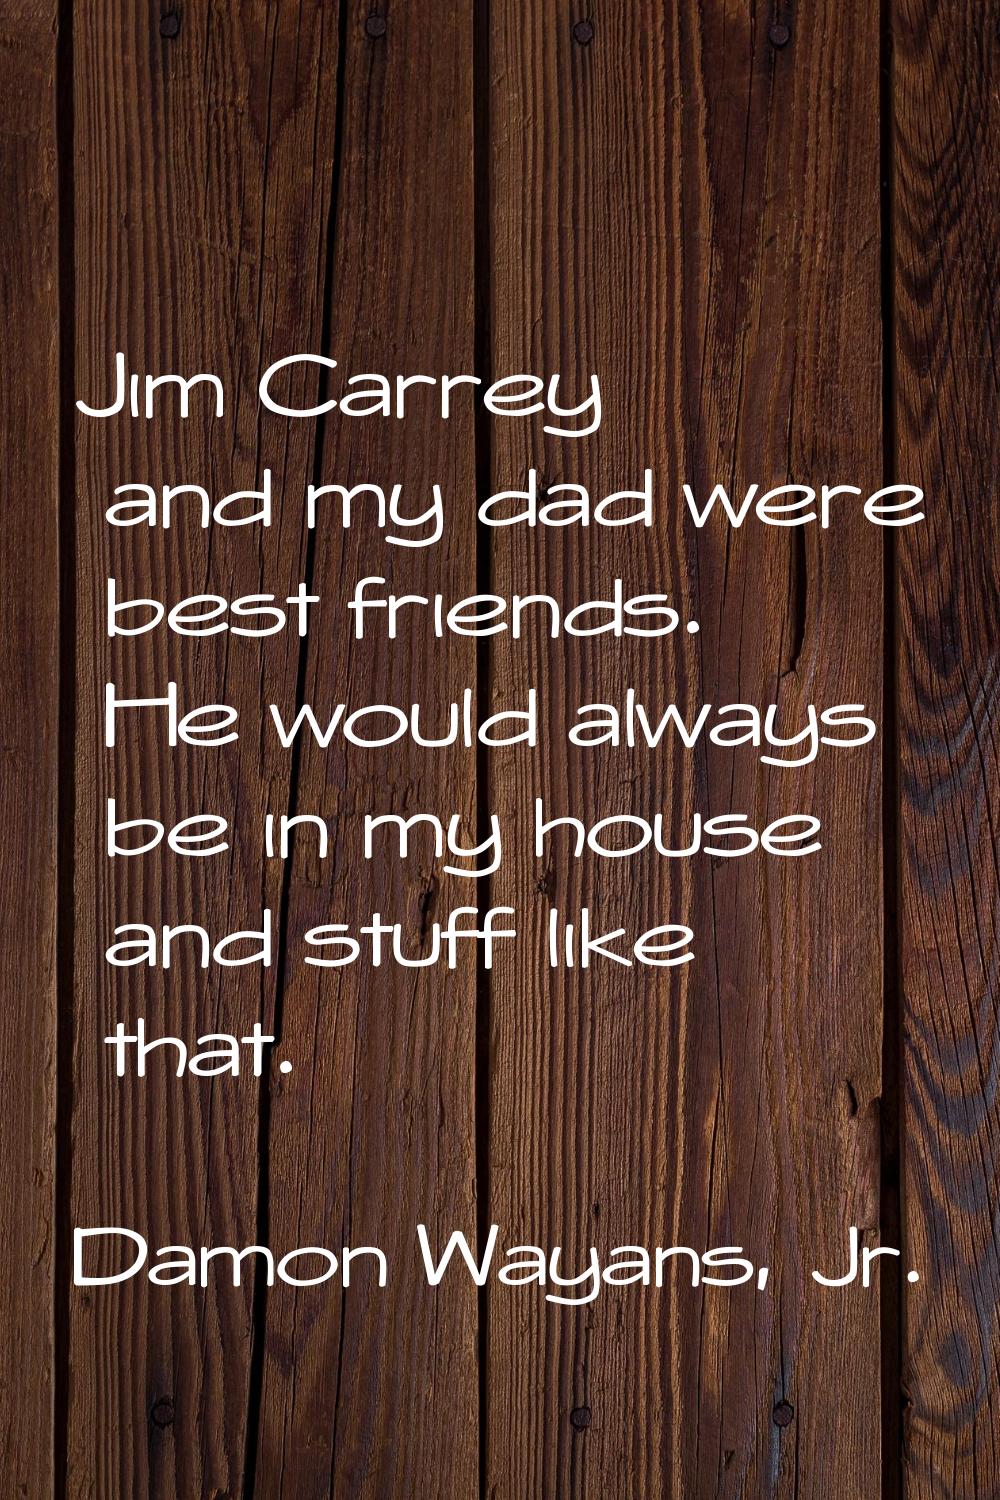 Jim Carrey and my dad were best friends. He would always be in my house and stuff like that.